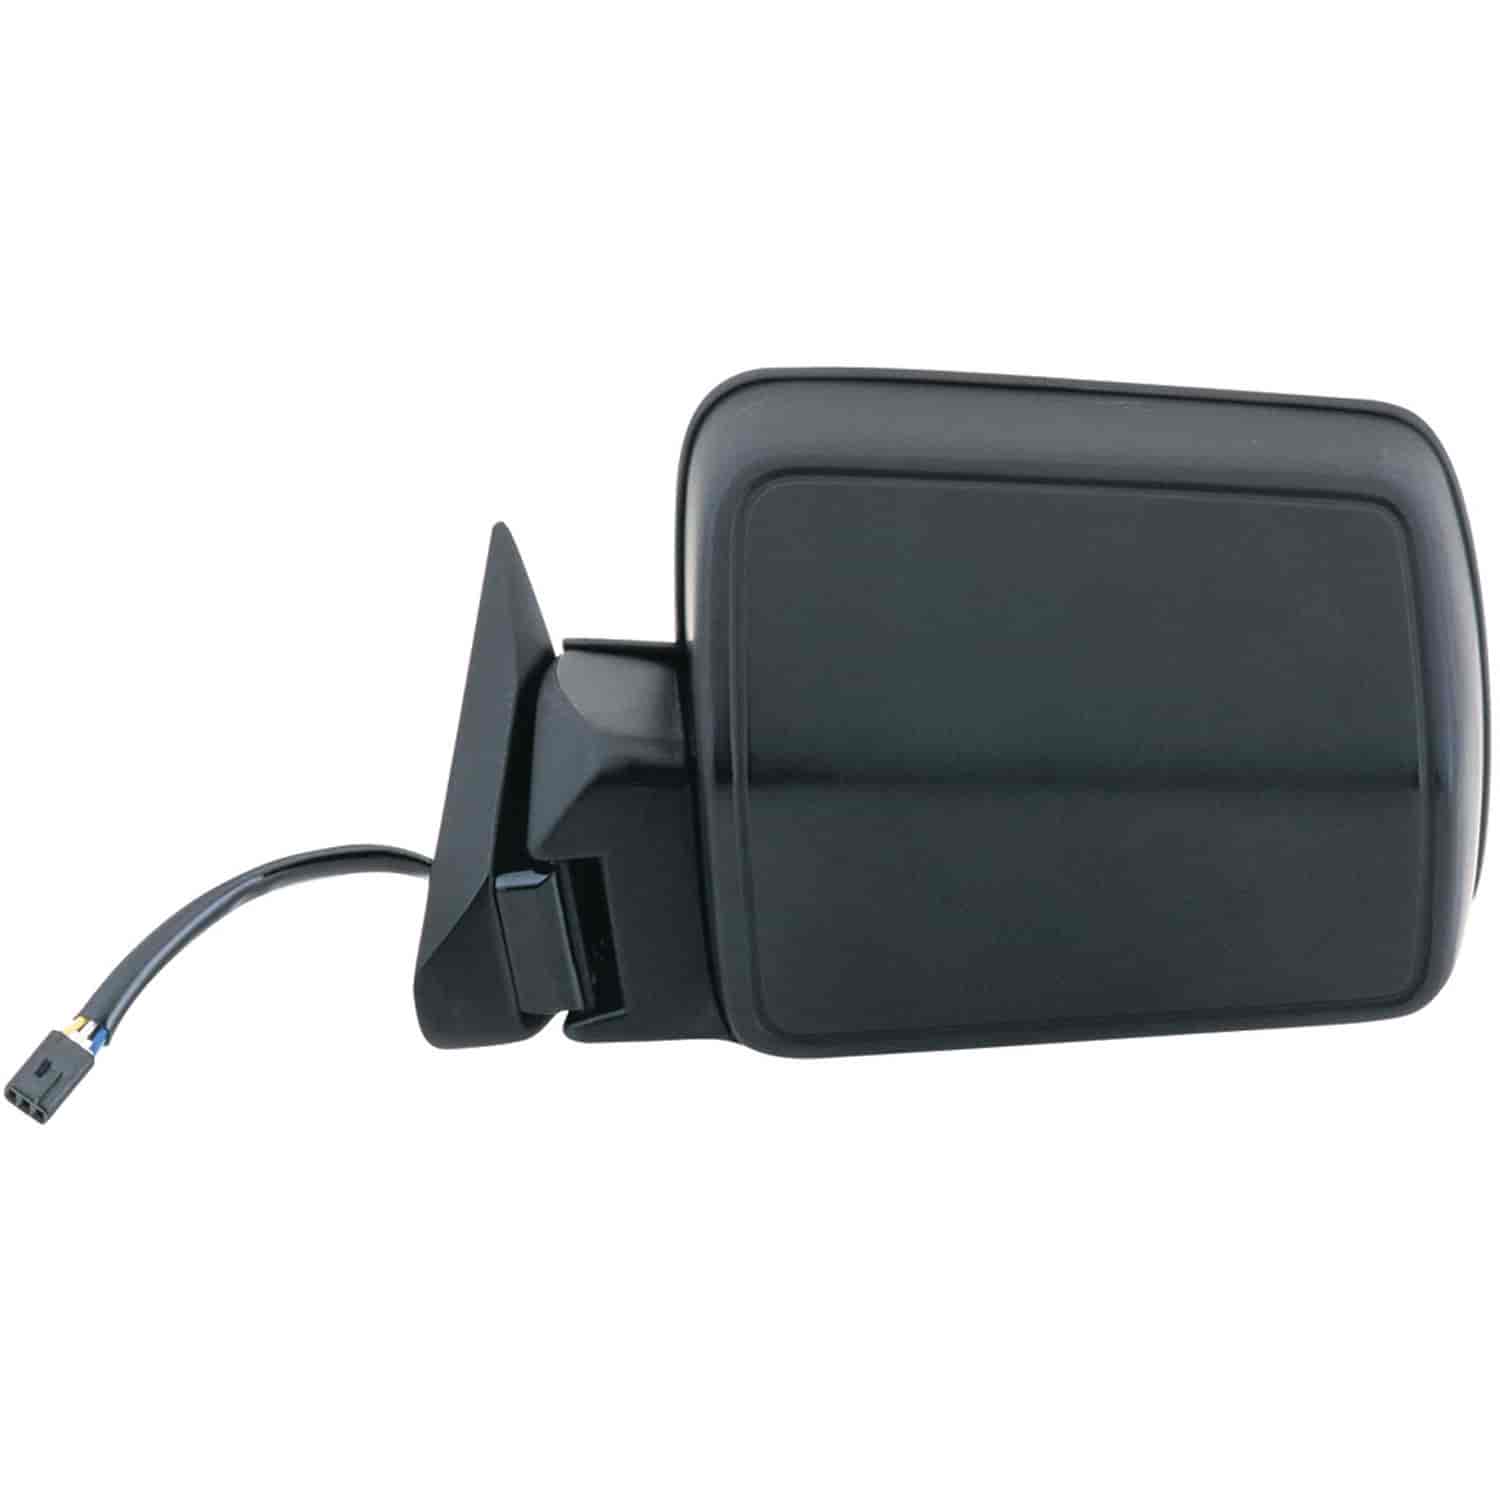 OEM Style Replacement mirror for 84-96 JEEP Cherokee/ Wagoneer driver side mirror tested to fit and